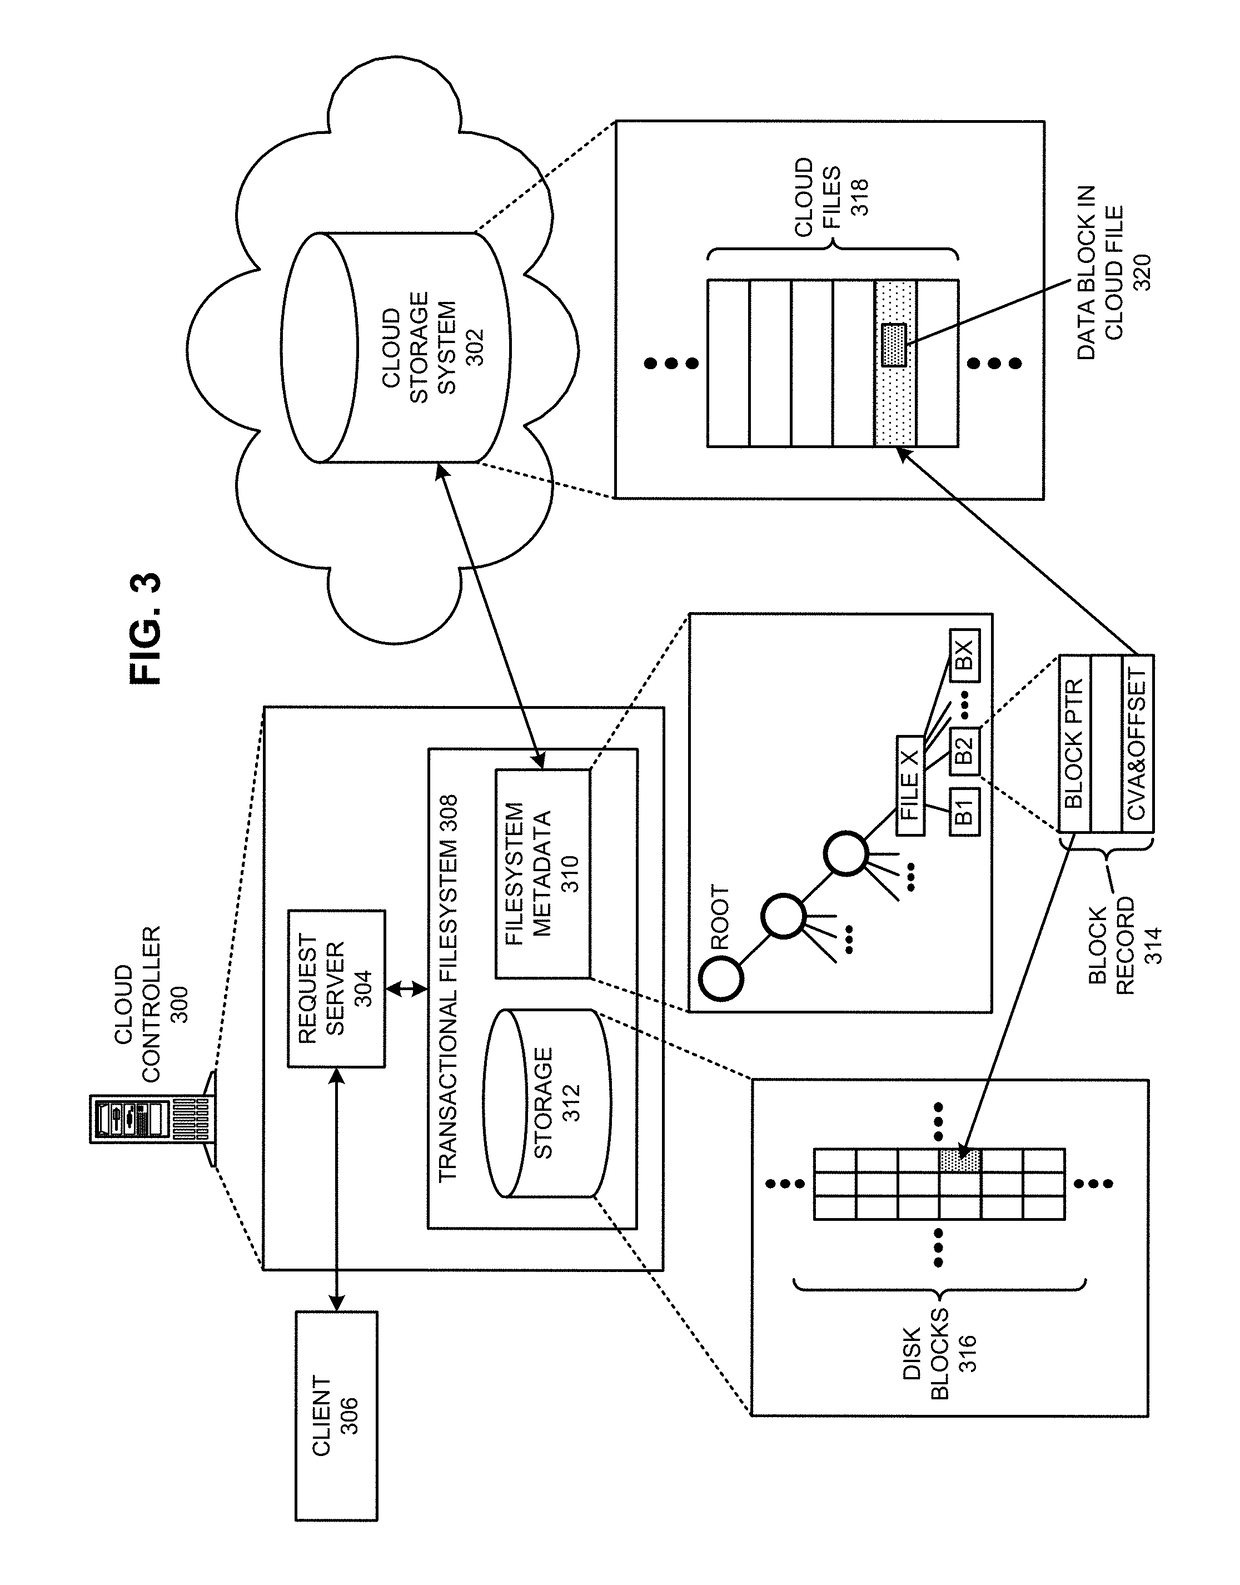 Transferring and caching a cloud file in a distributed filesystem